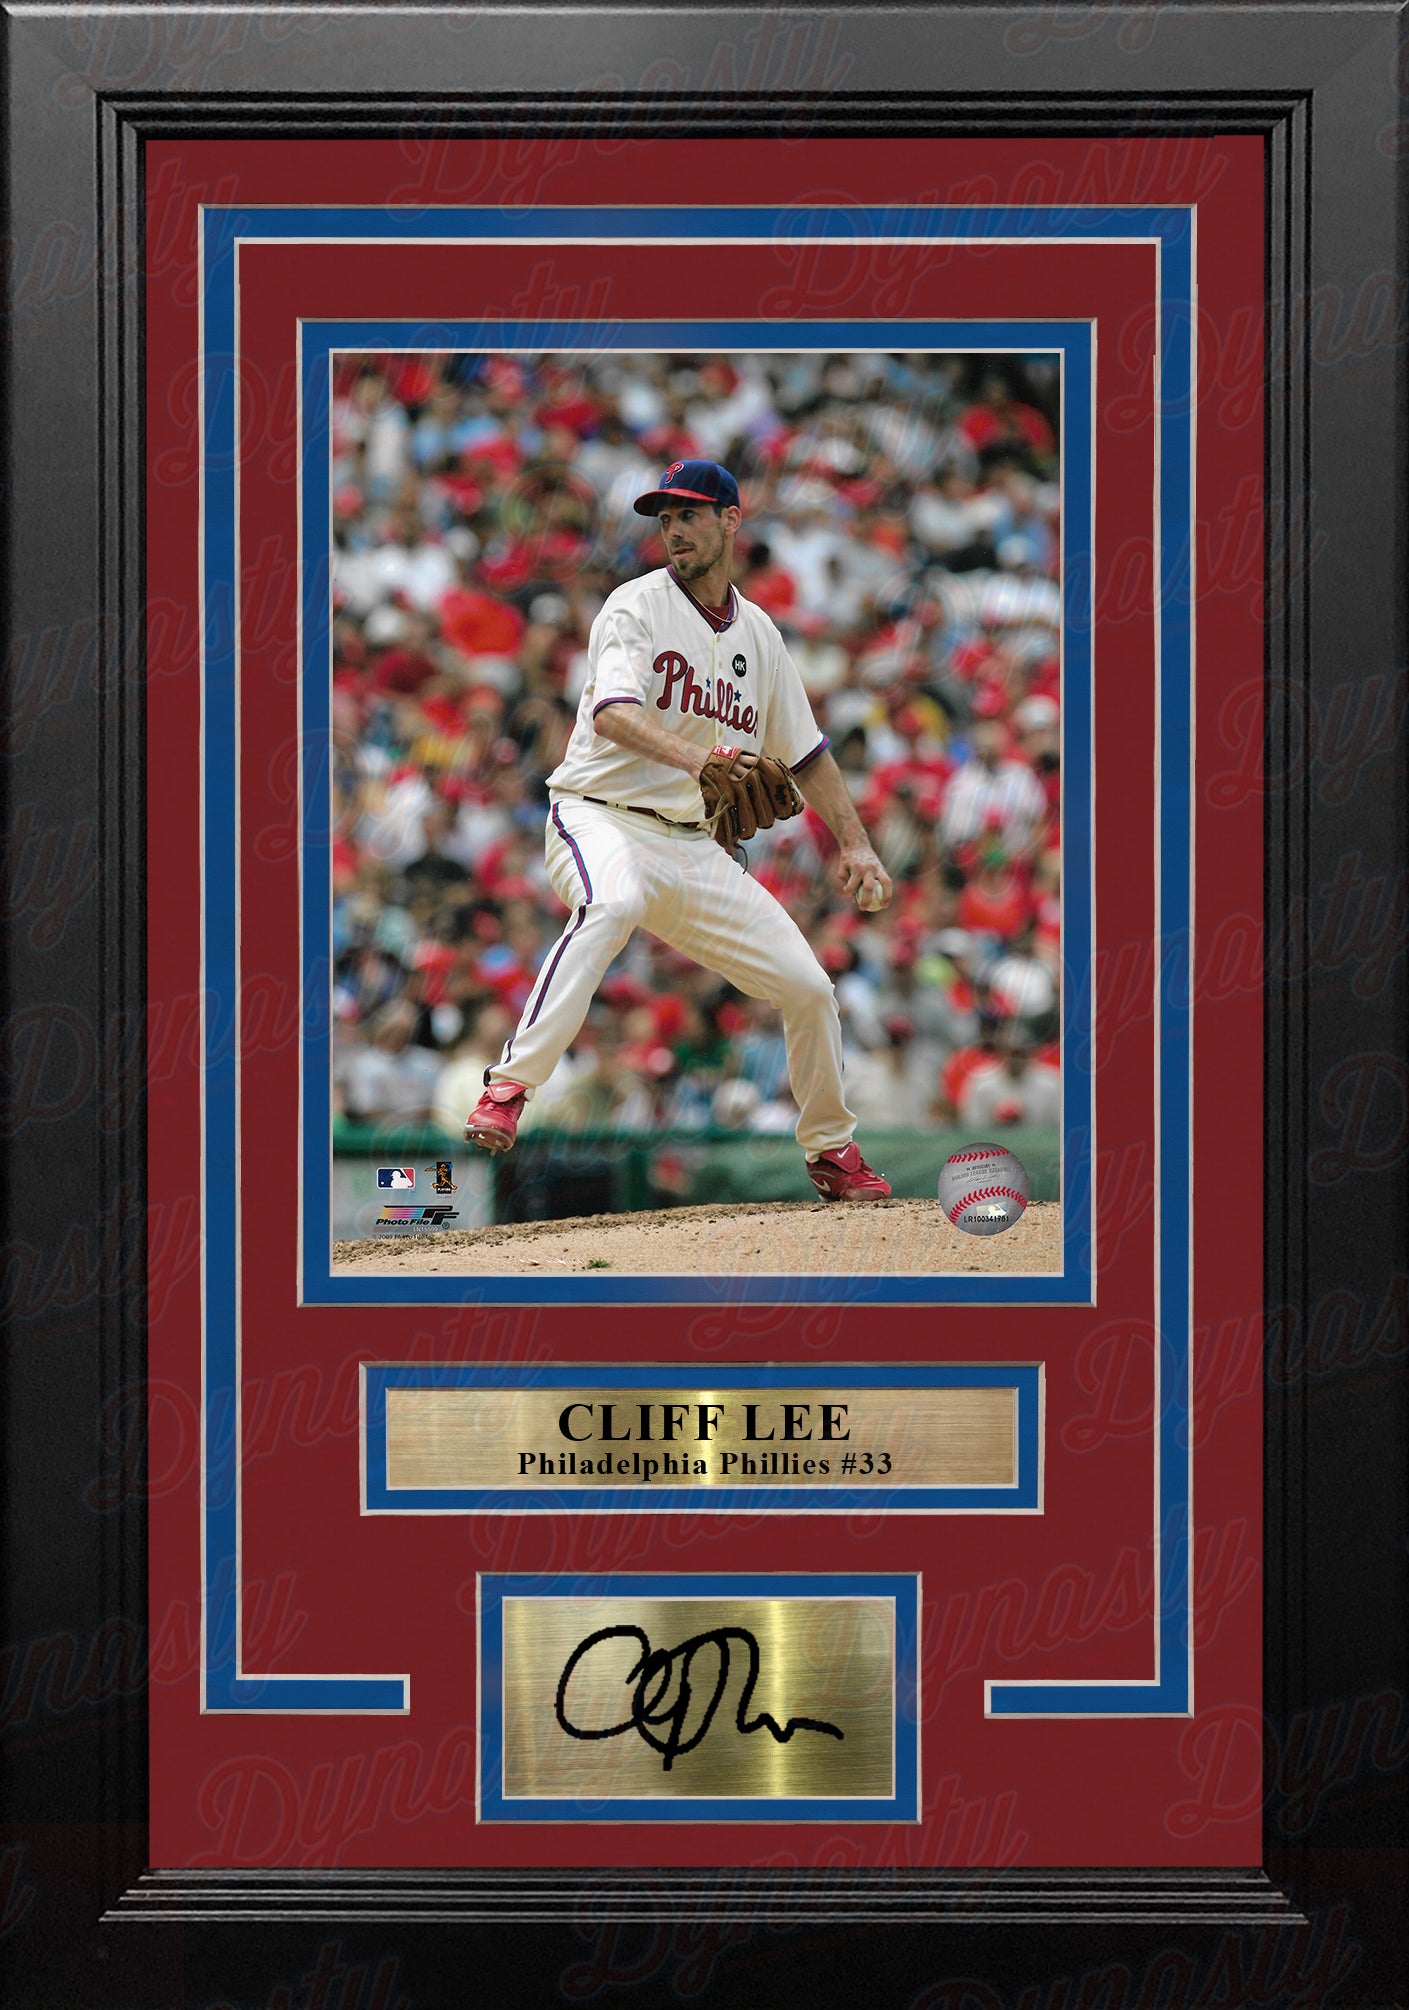 Cliff Lee in Action Philadelphia Phillies 8 x 10 Framed Baseball Photo  with Engraved Autograph